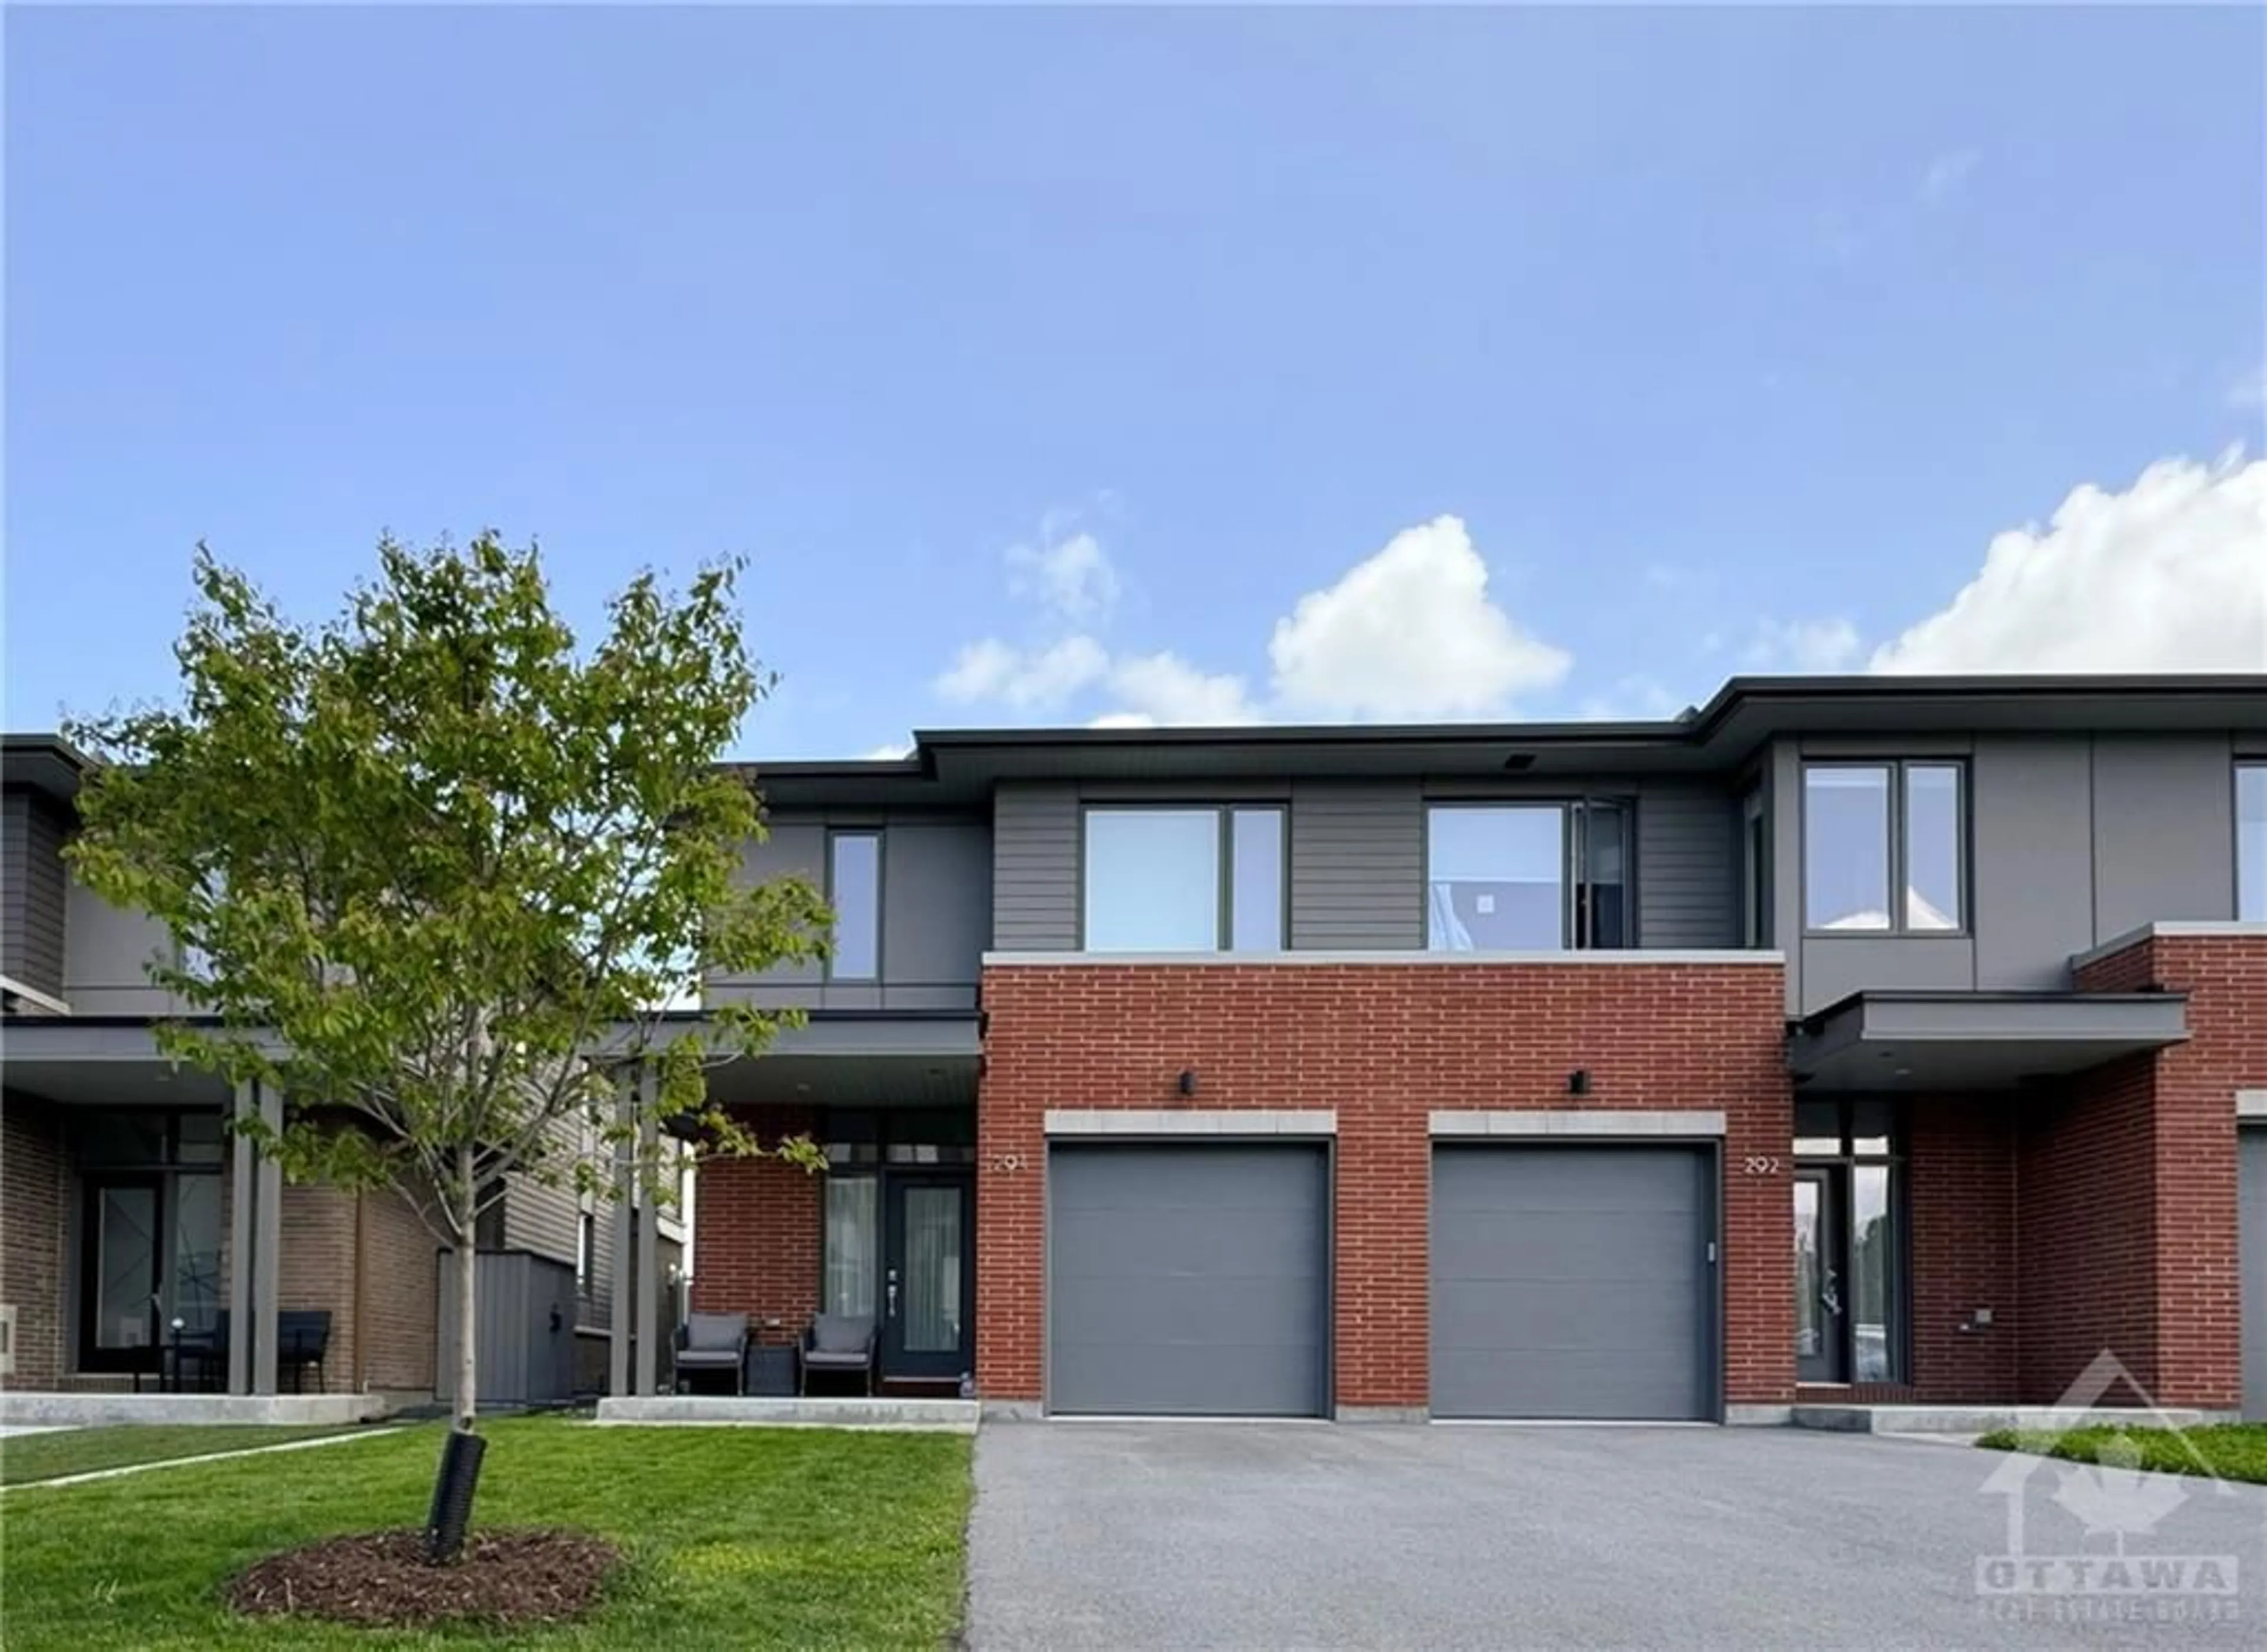 Home with brick exterior material for 294 SQUADRON Cres, Ottawa Ontario K1K 4Z4